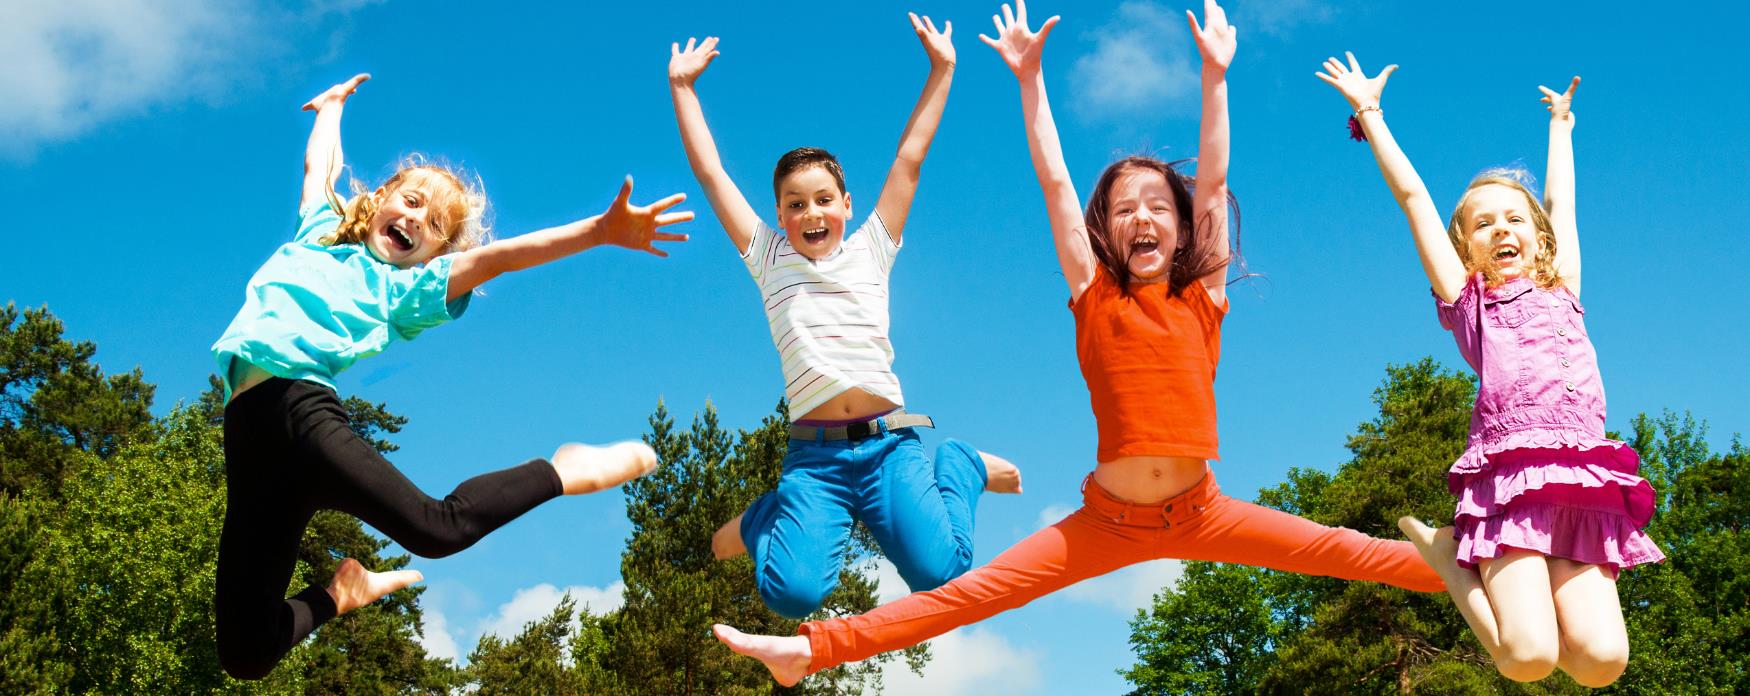 Happy kids jumping in air